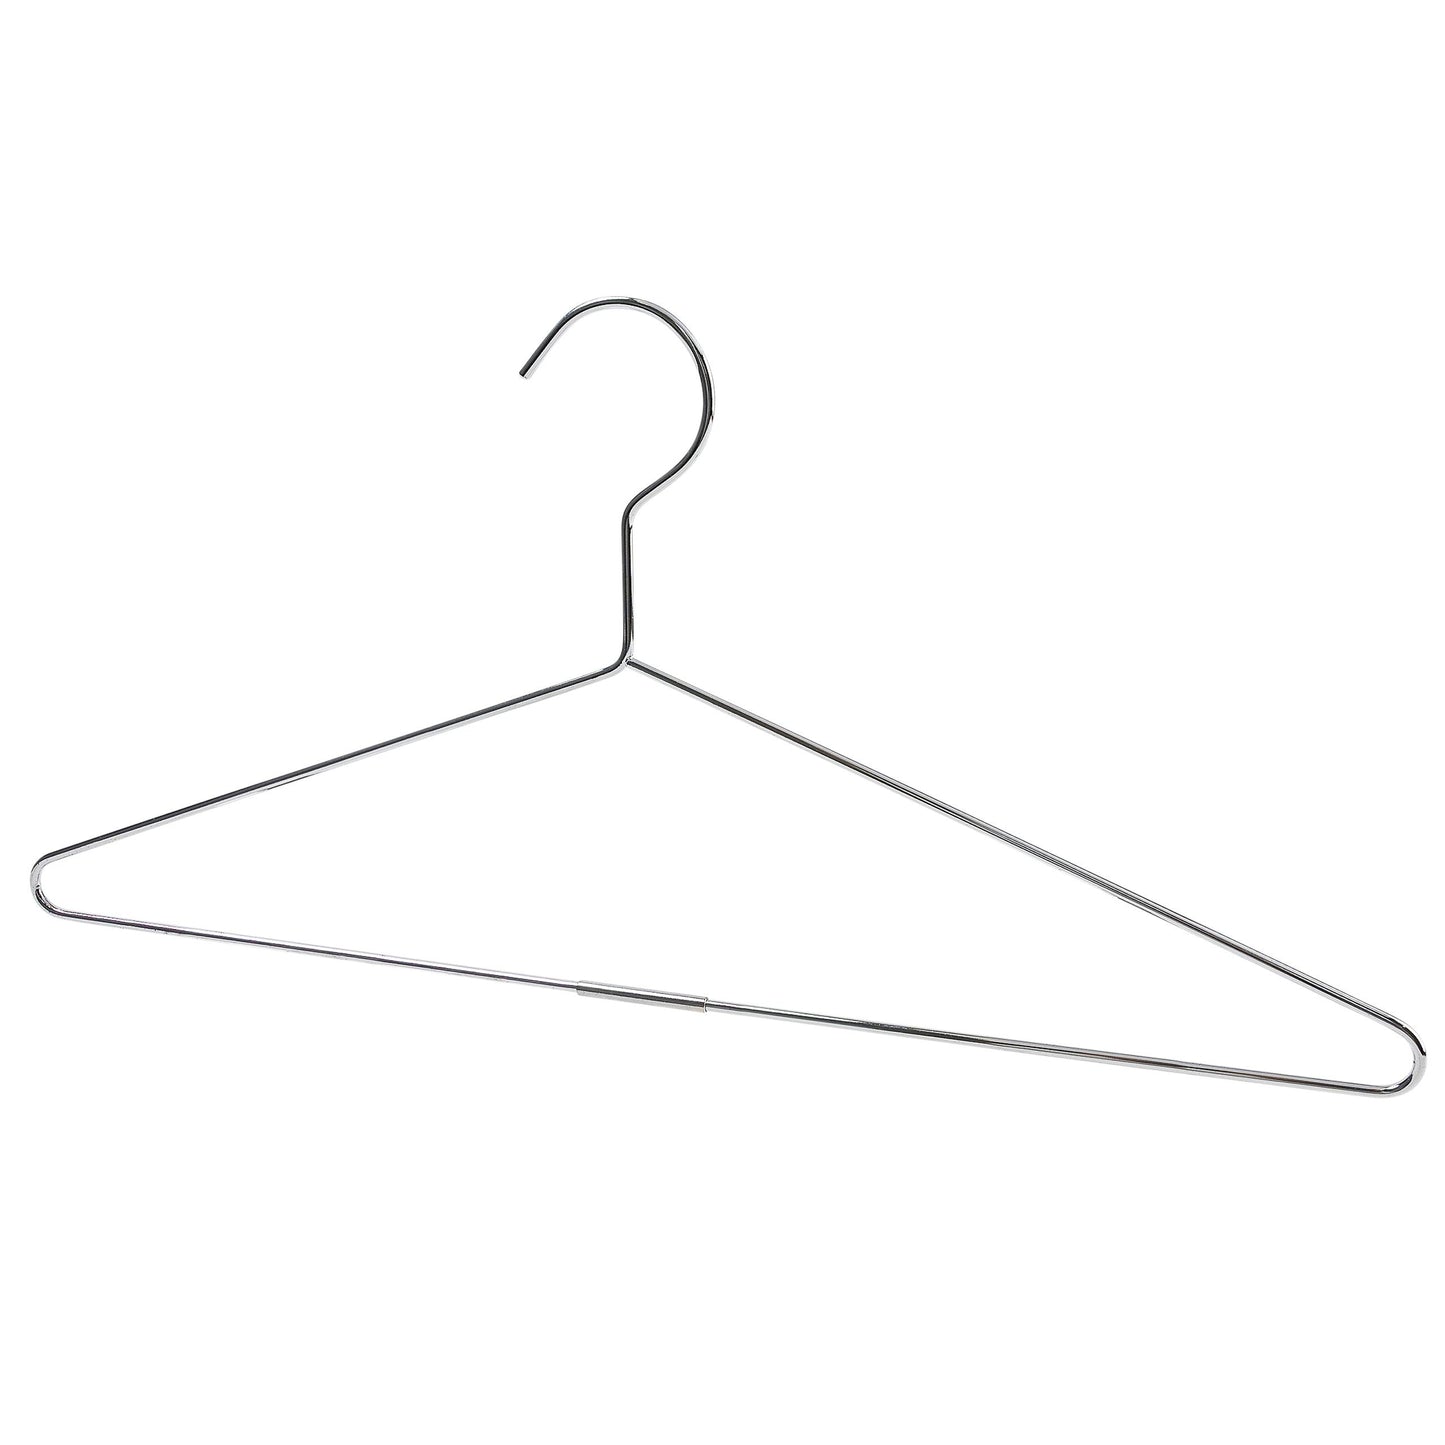 Metal Suit Hanger with Bar - 43CM X 3.5mm Thick - (Sold in Bundles of 25/50/100)